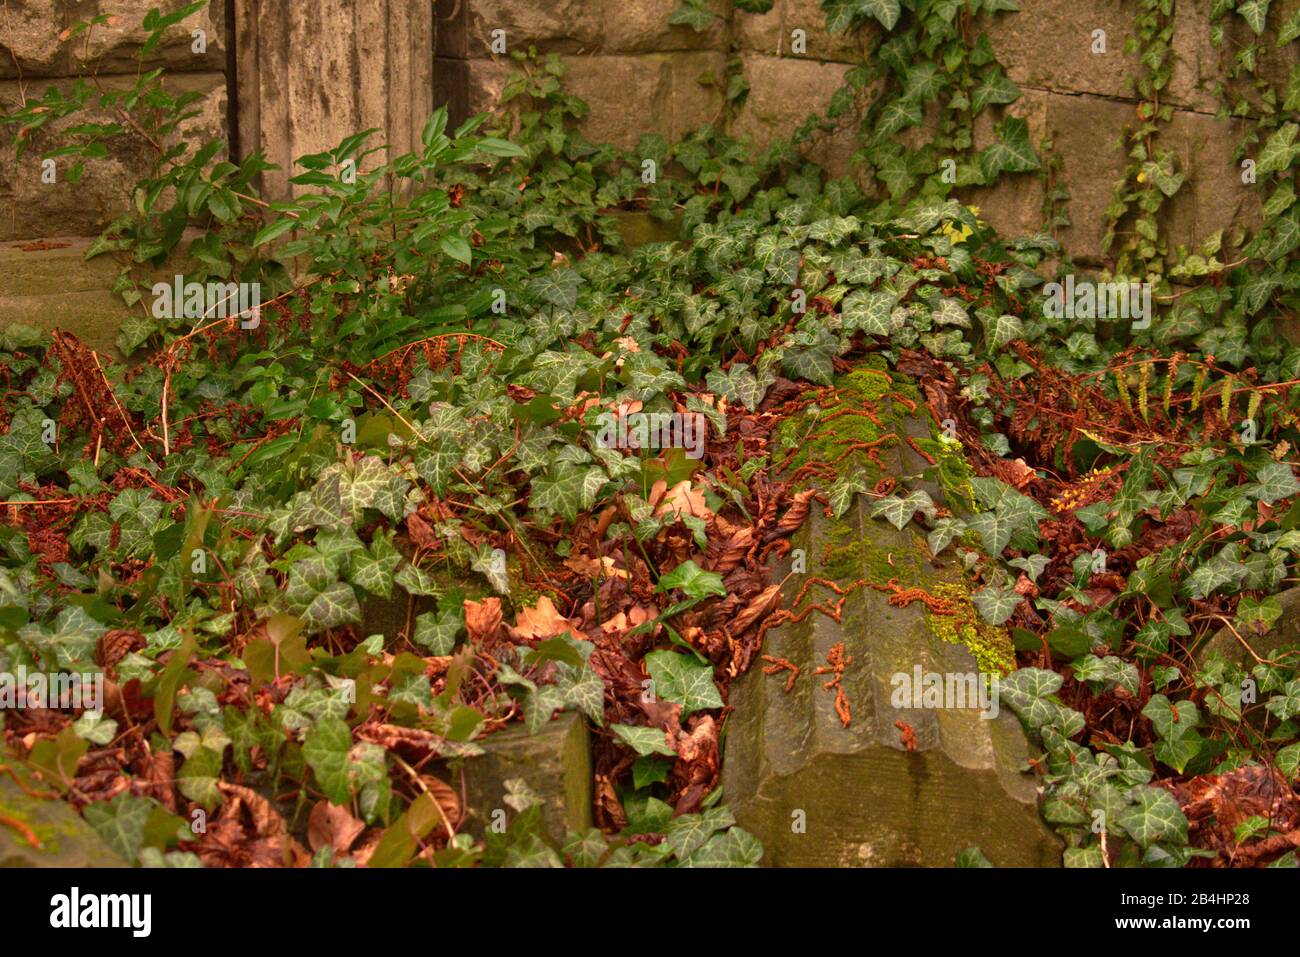 Weissensee Jewish Cemetery European ivy growing on the ground and stone in Berlin Stock Photo